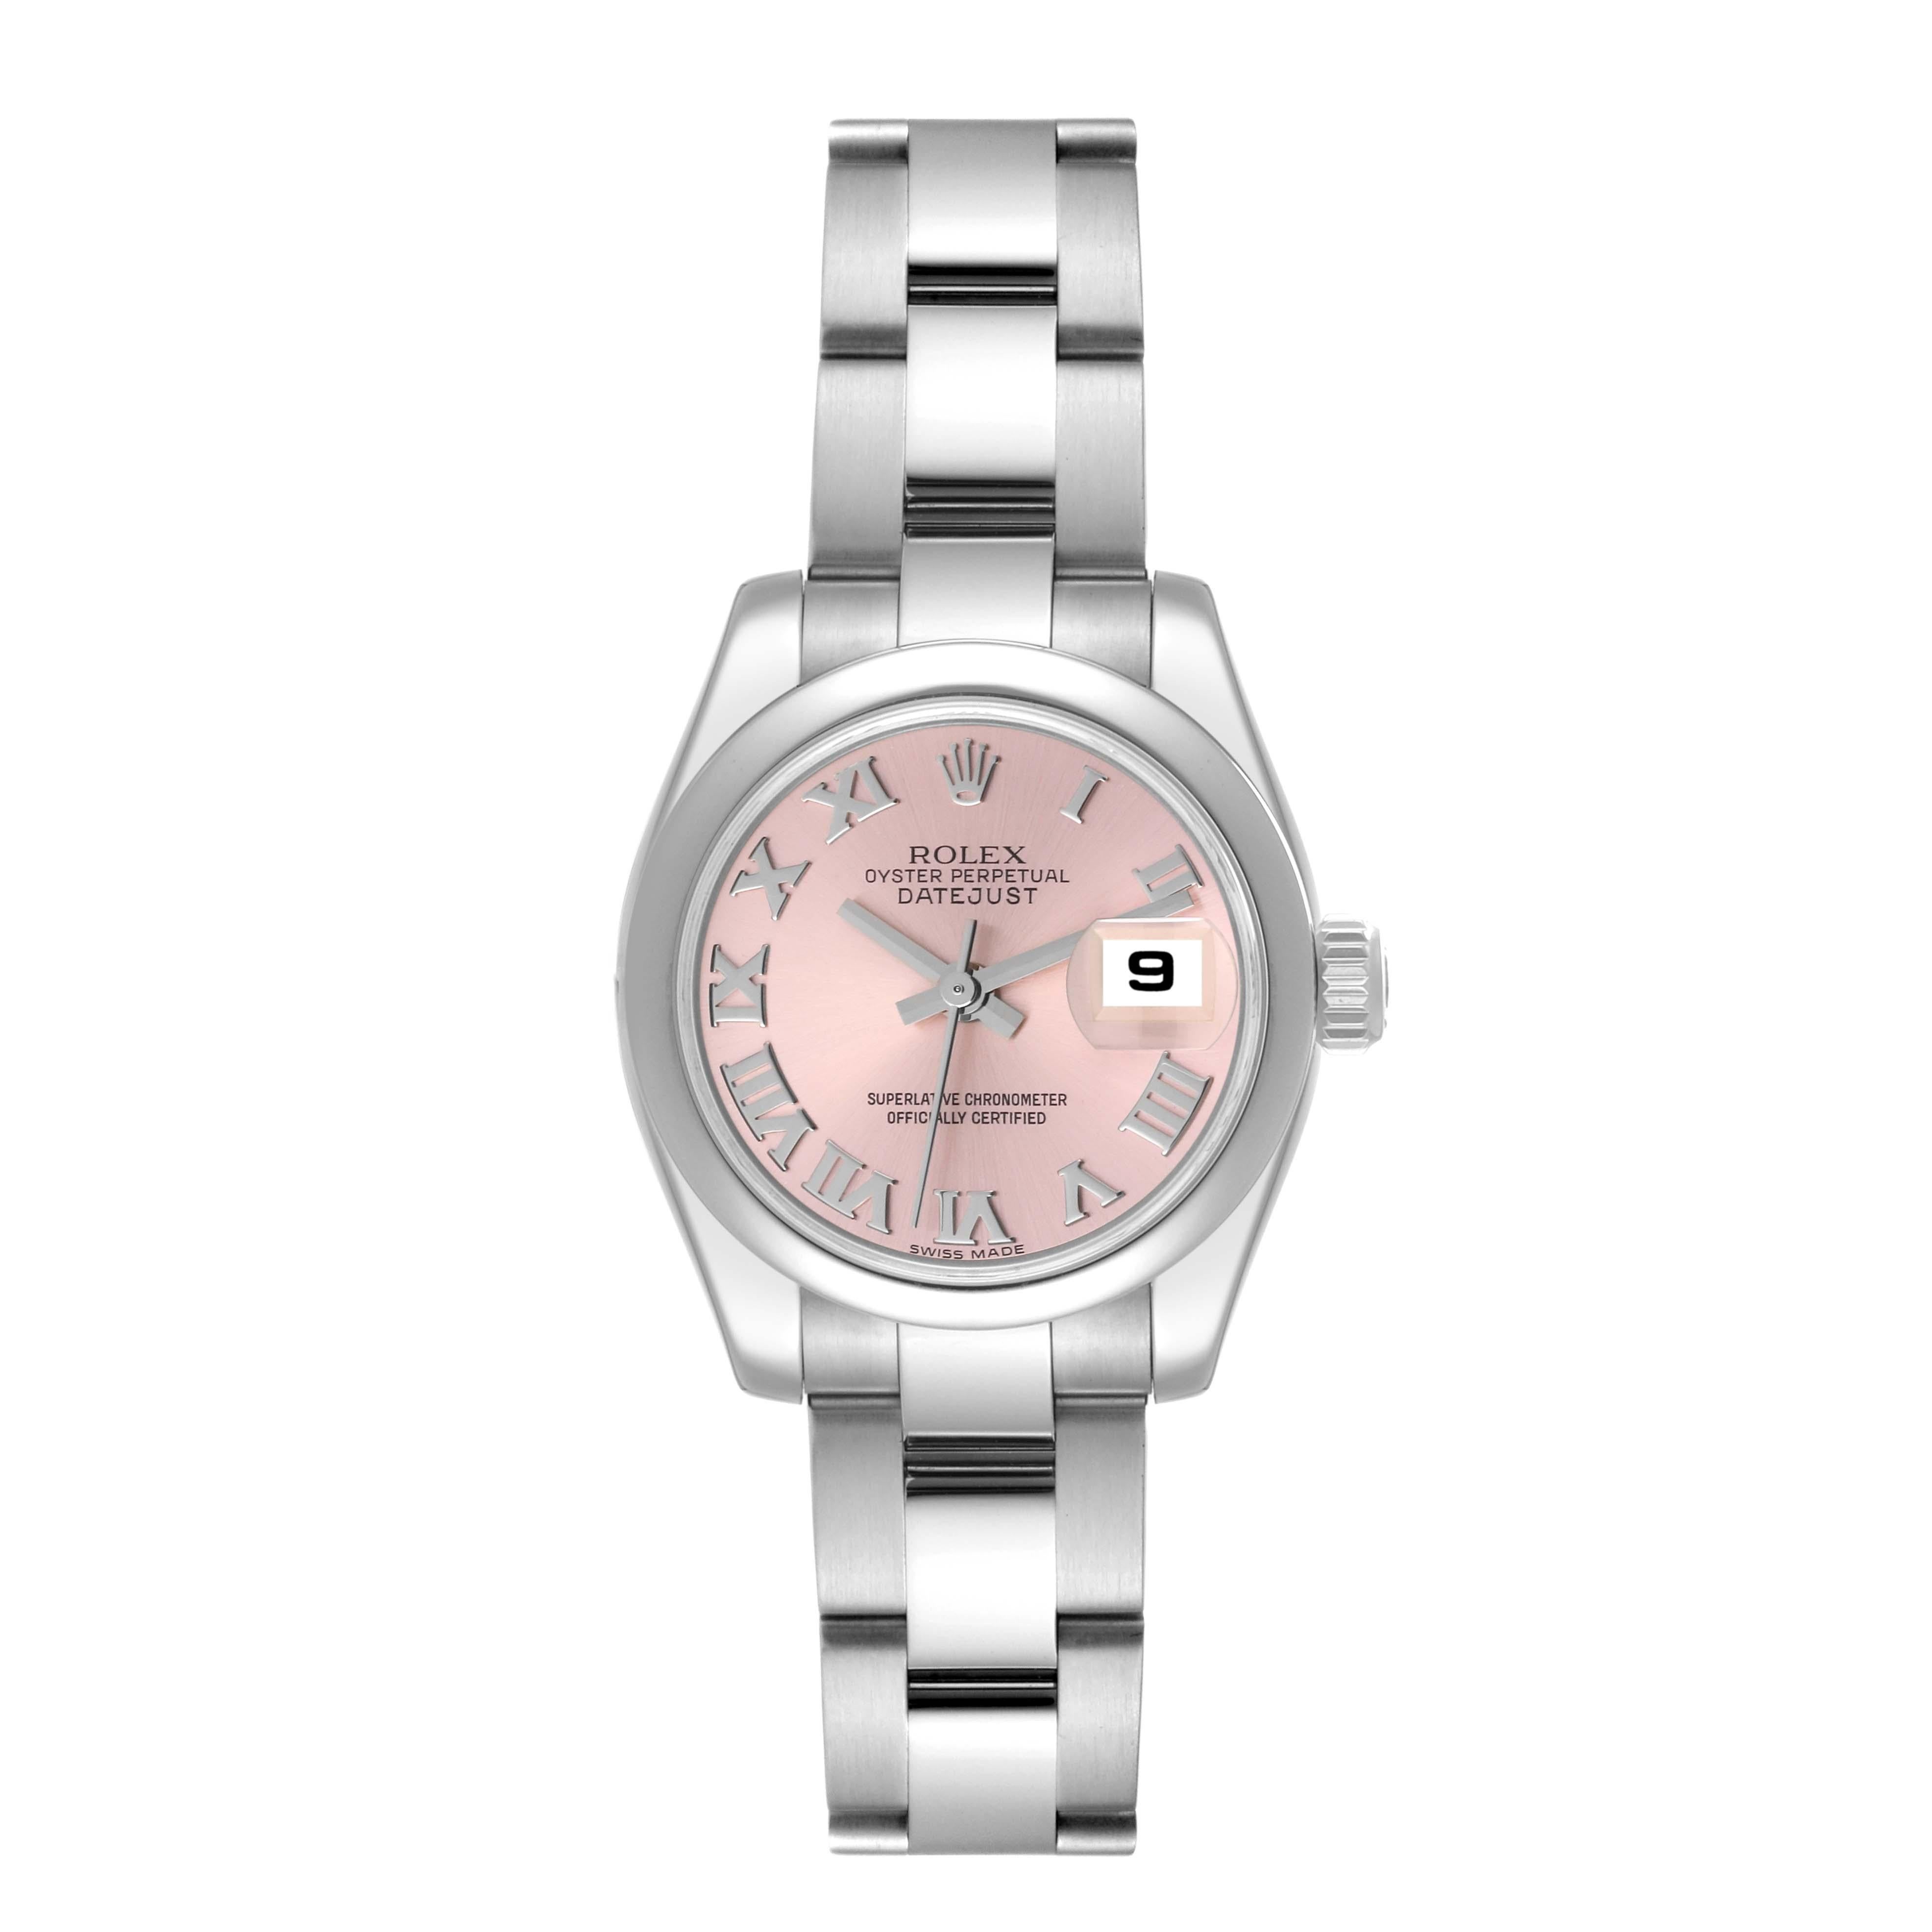 Rolex Datejust Pink Roman Dial Steel Ladies Watch 179160 Box Card. Officially certified chronometer self-winding movement with quickset date function. Stainless steel oyster case 26.0 mm in diameter. Rolex logo on a crown. Stainless steel smooth